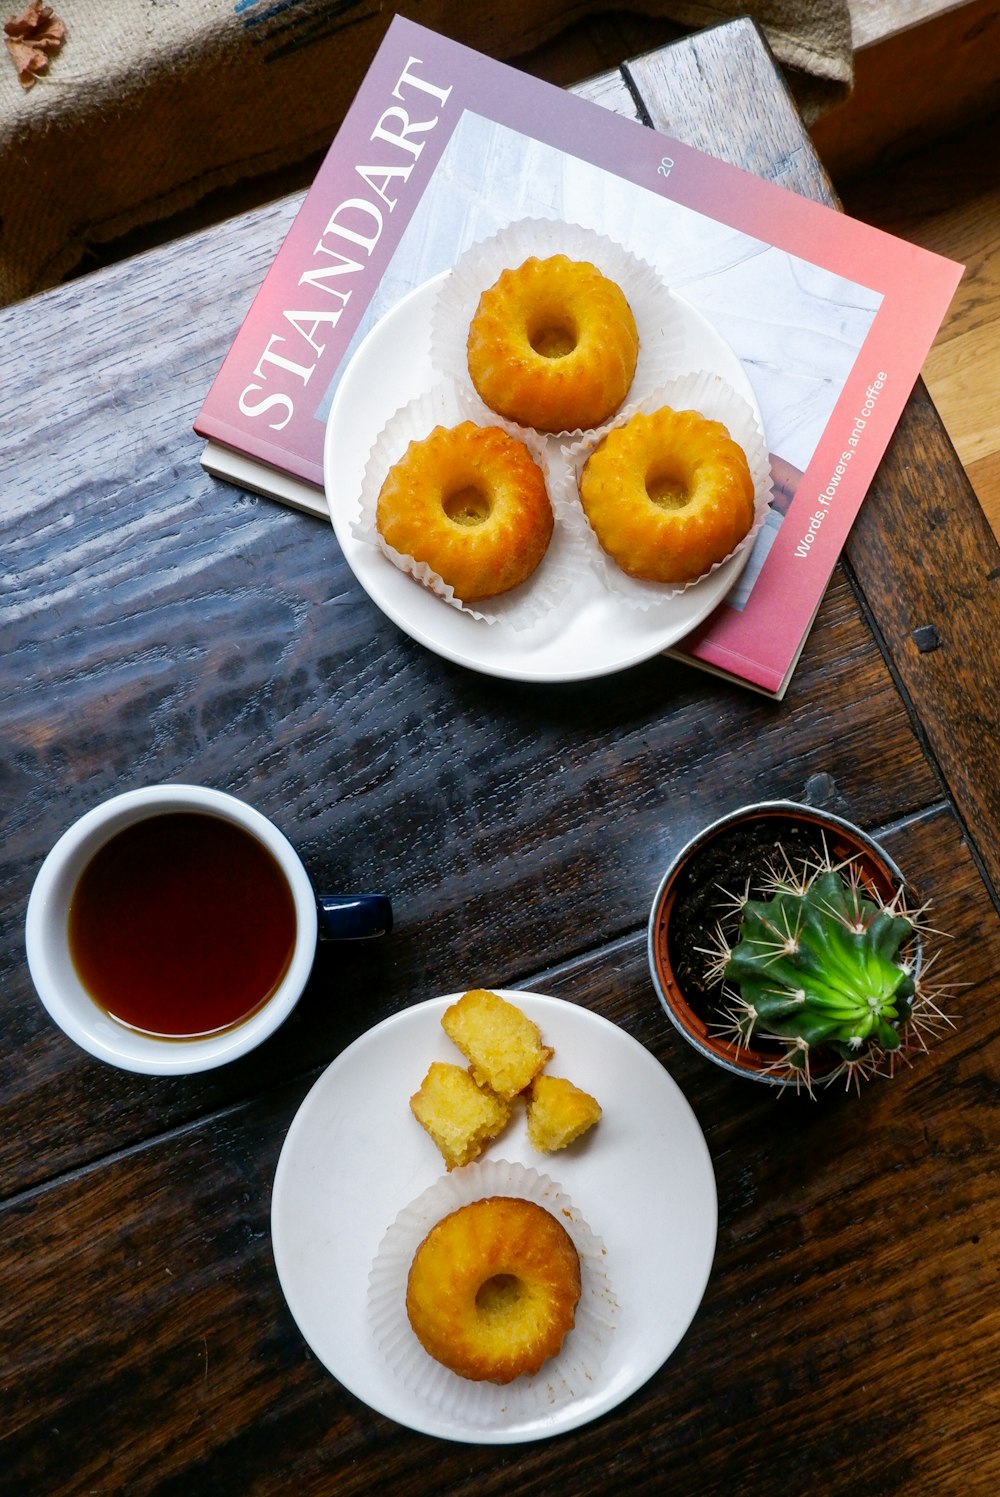 a plate of donuts and a cup of coffee